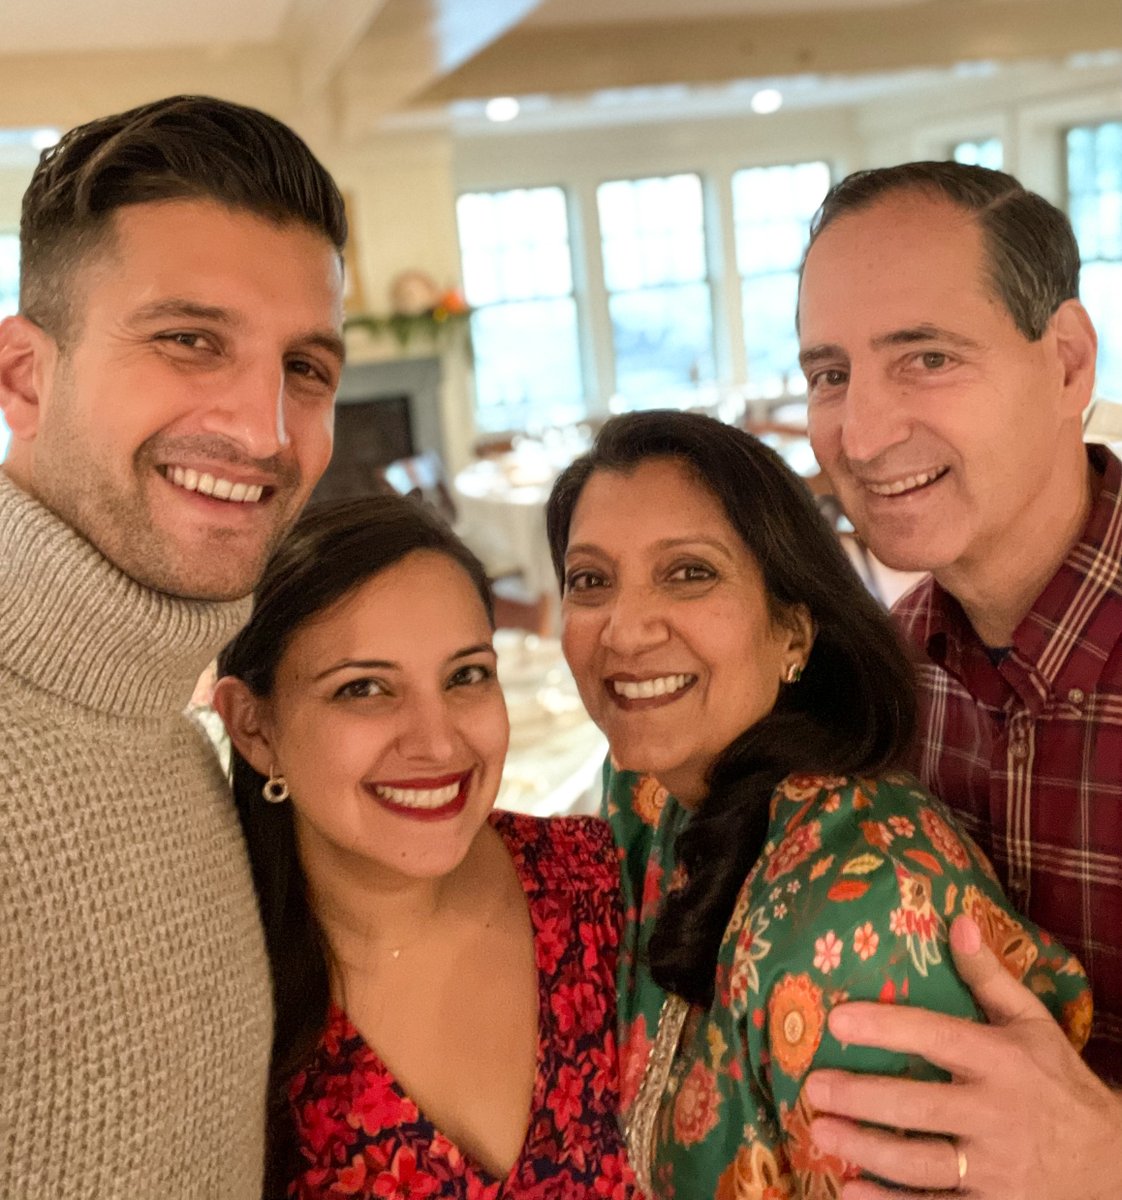 My mom is an absolute legend. Born and raised in Bangalore, India. Secretly applied to college in the U.S. and got a scholarship. Arrived in 1980 with no money to her name. Got her undergrad in two years and her masters in another two. Met an American guy and fell in love.